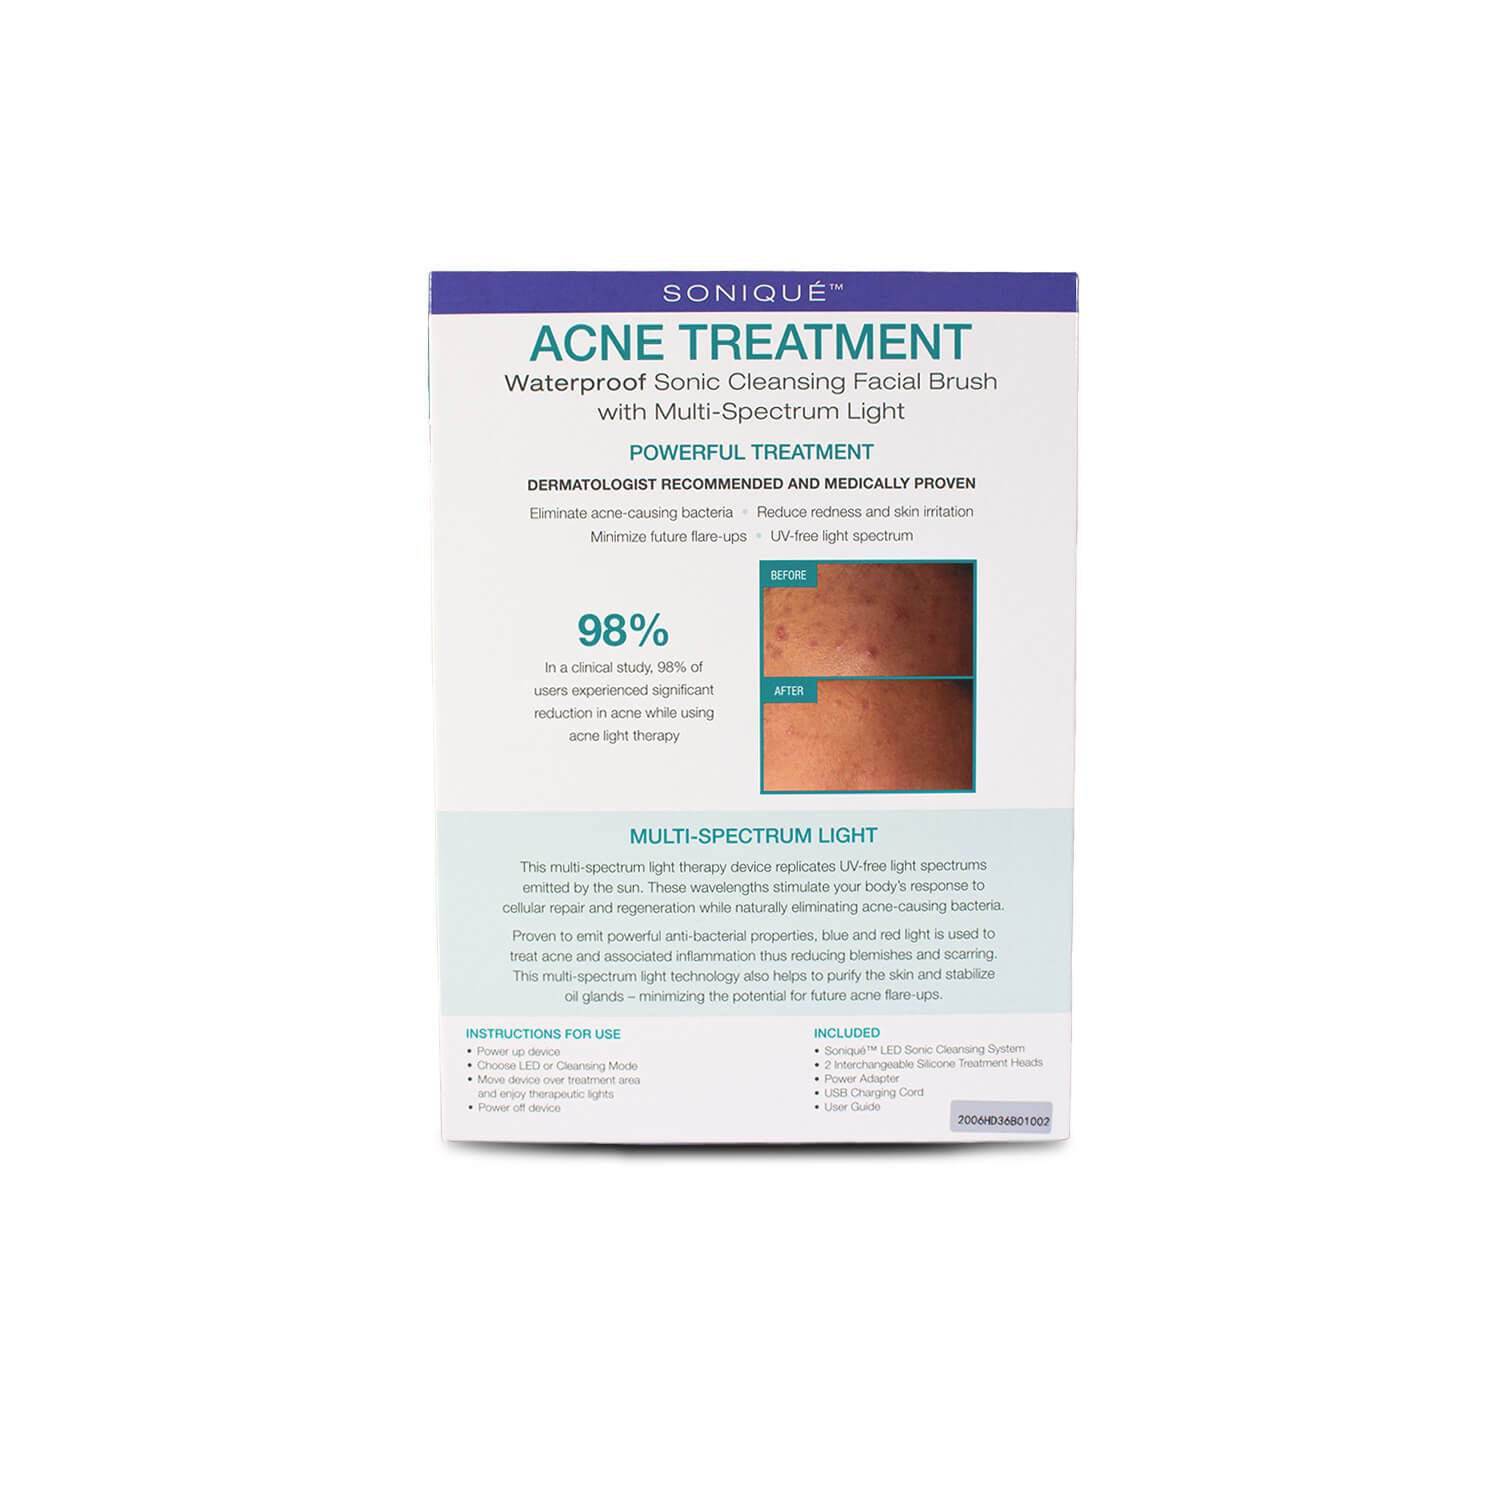 reVive Light Soniqué® Clinical— Light Therapy for Acne Treatment - Carex Health Brands